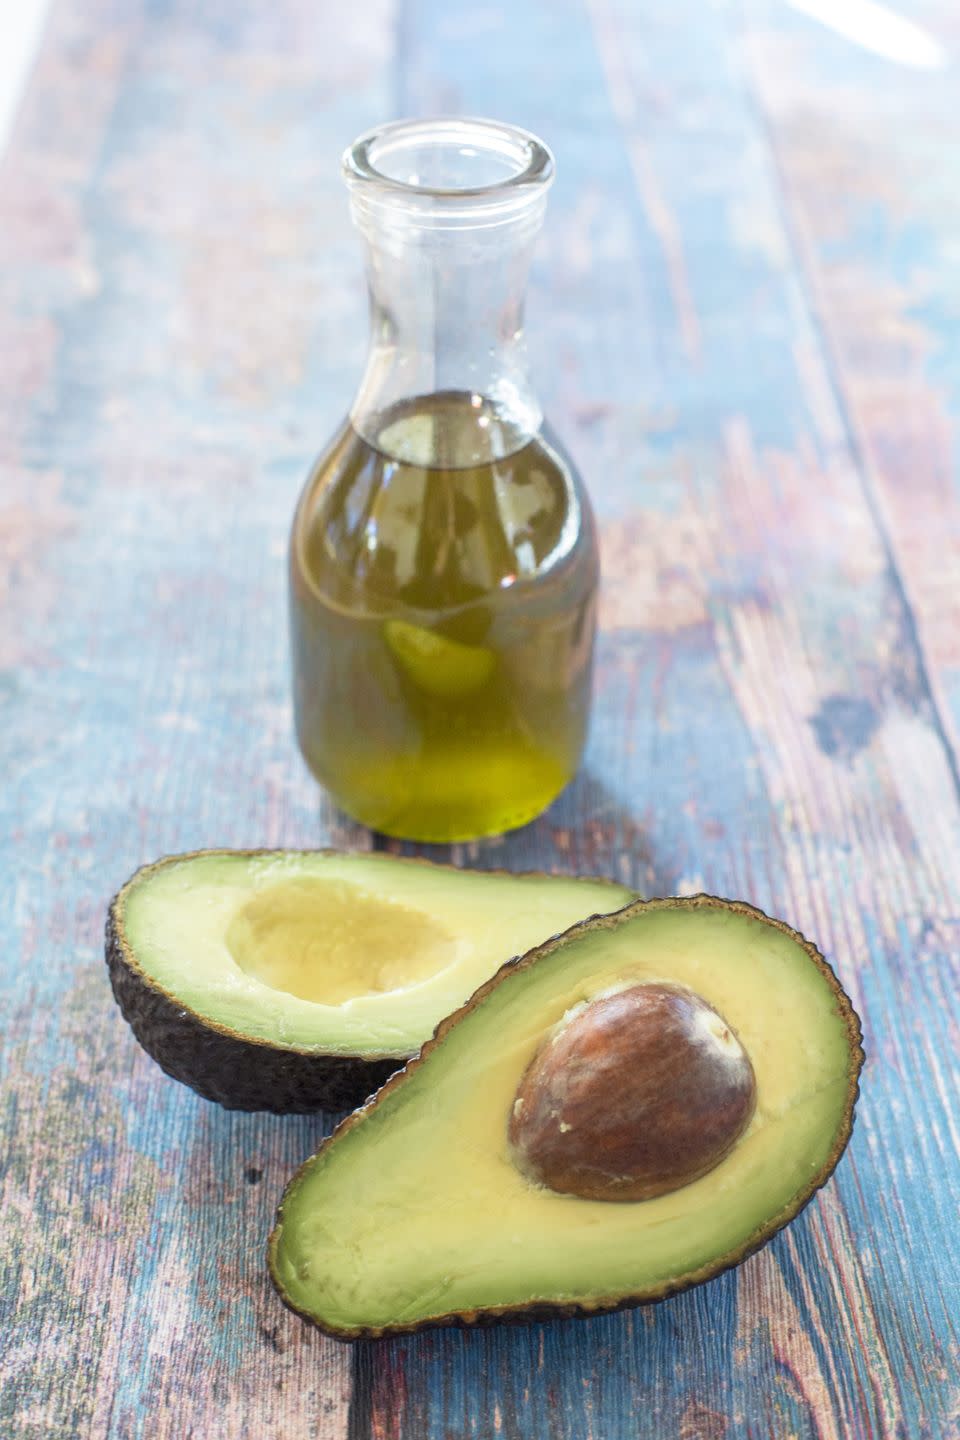 <p>This oil, derived from the flesh of pressed <a href="https://www.goodhousekeeping.com/health/diet-nutrition/a47998/avocado-nutrition/" rel="nofollow noopener" target="_blank" data-ylk="slk:avocados;elm:context_link;itc:0;sec:content-canvas" class="link ">avocados</a>, has a mild flavor and high smoke point so it's perfect for almost any cooking uses in the kitchen. <strong>Avocado oil has one of the highest levels of healthy monounsaturated fats of all oils</strong>, and it's also low in polyunsaturated fats. These combined fats make avocado oil a heart-healthy choice. It also contains beneficial antioxidants like lutein, which is naturally found in the eyes. An eating routine high in lutein may <a href="https://www.ncbi.nlm.nih.gov/pmc/articles/PMC6936877/" rel="nofollow noopener" target="_blank" data-ylk="slk:decrease the risk of cataracts and macular degeneration;elm:context_link;itc:0;sec:content-canvas" class="link ">decrease the risk of cataracts and macular degeneration</a>, a common eye disorder for people over 50. Your body does not produce lutein on its own, so getting it from your diet is key and adding avocado oil to your dish is a great way to support the <a href="https://www.goodhousekeeping.com/health/wellness/a37409734/eye-health-myth-quiz/" rel="nofollow noopener" target="_blank" data-ylk="slk:health of your eyes;elm:context_link;itc:0;sec:content-canvas" class="link ">health of your eyes</a>. In addition, though it shouldn't replace sunscreen, <a href="https://pubmed.ncbi.nlm.nih.gov/20978772/" rel="nofollow noopener" target="_blank" data-ylk="slk:research;elm:context_link;itc:0;sec:content-canvas" class="link ">research</a> has found that both topically and when consumed, avocado oil may protect against <a href="https://www.goodhousekeeping.com/beauty/a32210179/areas-prone-to-sunburn/" rel="nofollow noopener" target="_blank" data-ylk="slk:UV rays;elm:context_link;itc:0;sec:content-canvas" class="link ">UV rays</a> as it helps nourish and protect the skin.</p><p>The mild flavor is very versatile, which is why avocado oil is the perfect healthy swap in any baked goods. It tends to be a bit more expensive, but many brands offer it in a spray container without propellants so you can control how much you use at a time. </p><p><strong>Best for: </strong>Frying, roasting, baked goods</p><p><strong>Smoke point:</strong> Virgin 375°F, refined 520°F</p><p><strong>Nutritionist pick:</strong> <a href="https://www.amazon.com/Chosen-Foods-Propellant-Free-Pressure-High-Heat/dp/B00P2DKCHG?tag=syn-yahoo-20&ascsubtag=%5Bartid%7C10055.g.32108013%5Bsrc%7Cyahoo-us" rel="nofollow noopener" target="_blank" data-ylk="slk:Chosen Foods Avocado Oil Spray;elm:context_link;itc:0;sec:content-canvas" class="link ">Chosen Foods Avocado Oil Spray</a><br></p>